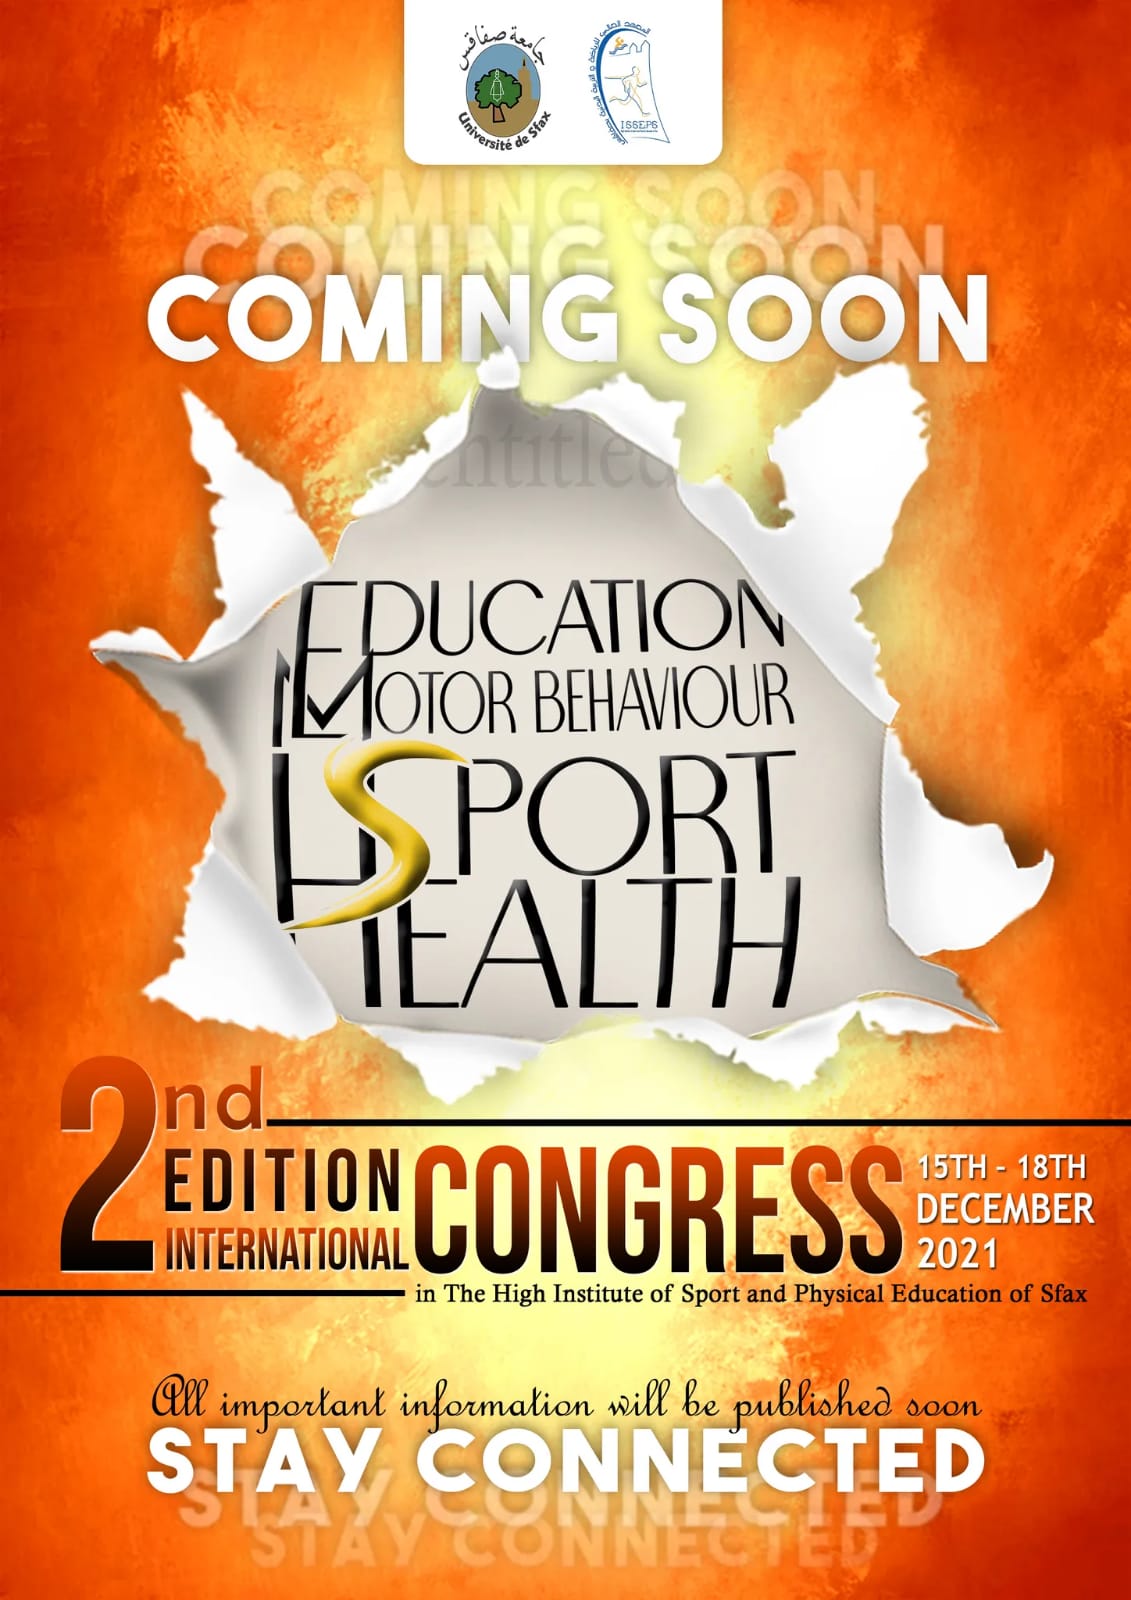 Call for abstracts for the 2nd International Congress on “Education, Motor Behaviour, Sport and Health